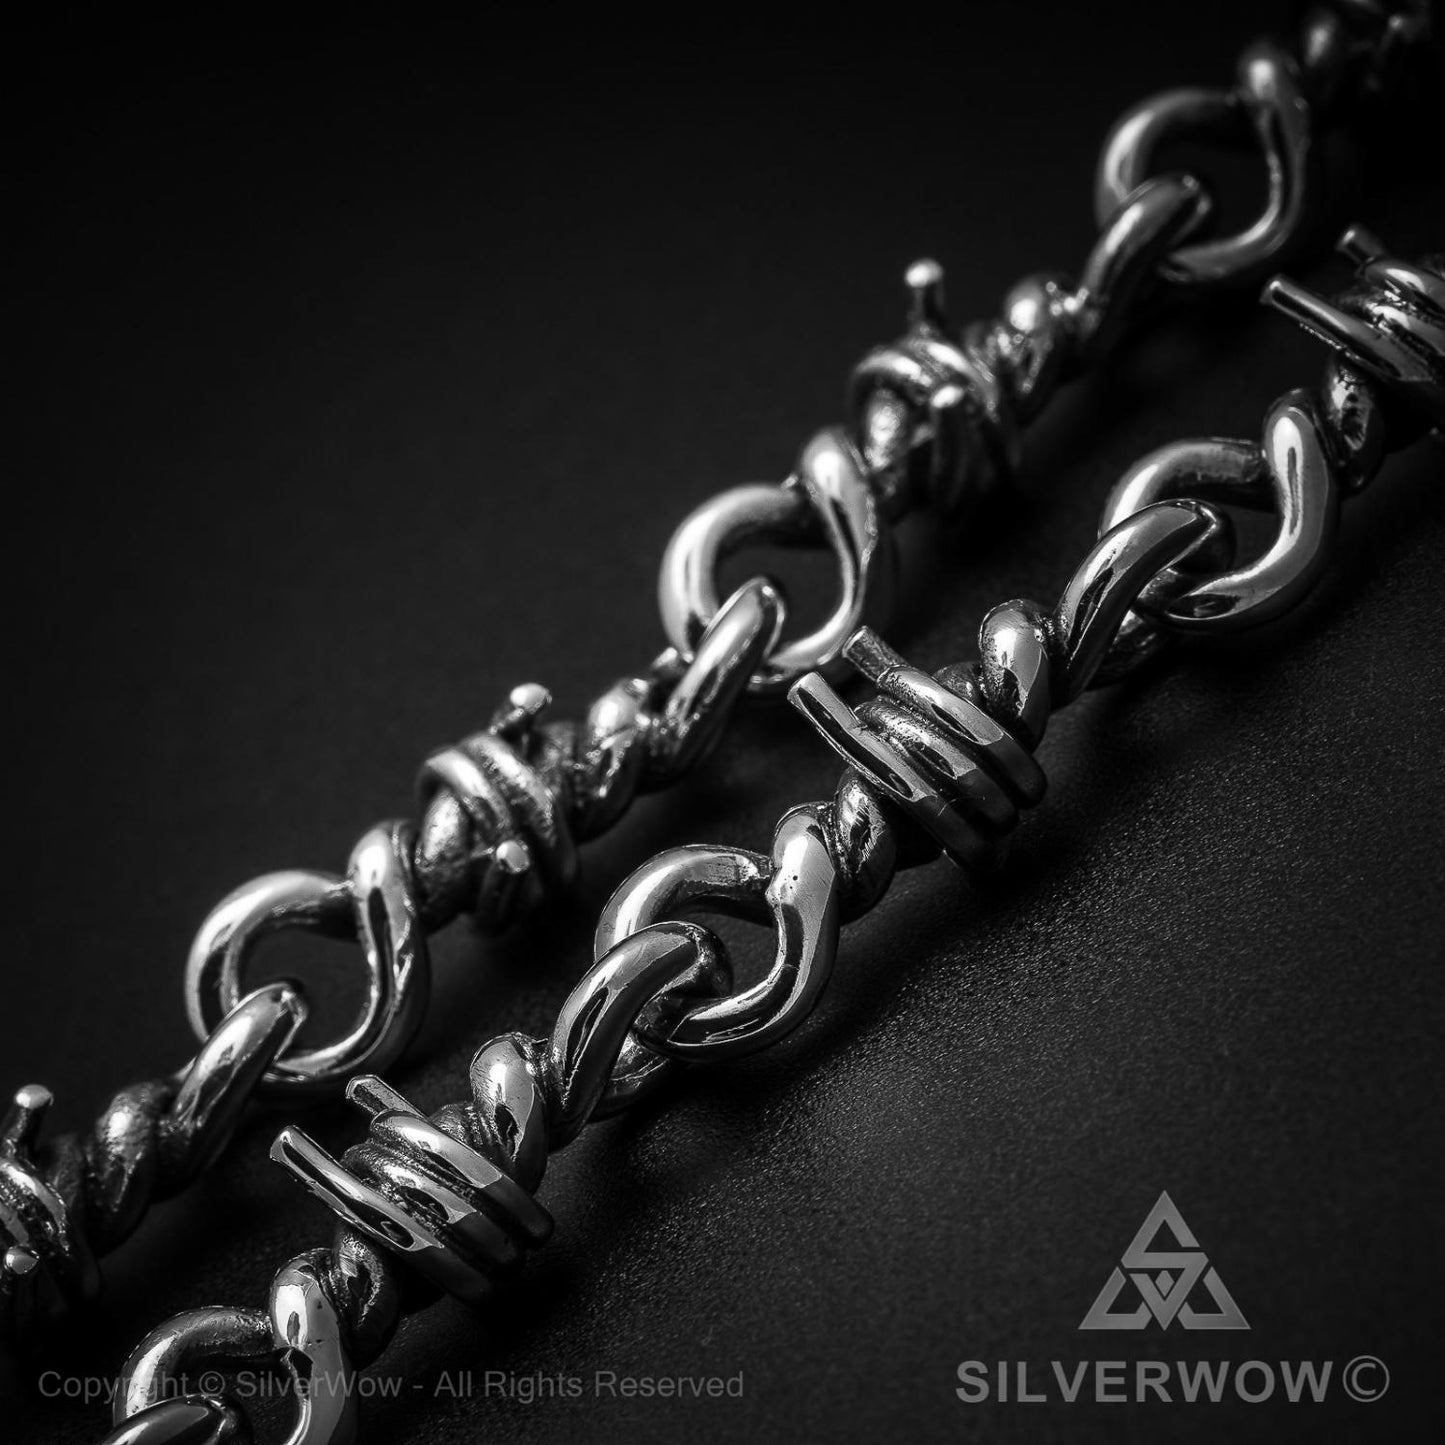 Heavy Barb Wire Necklace